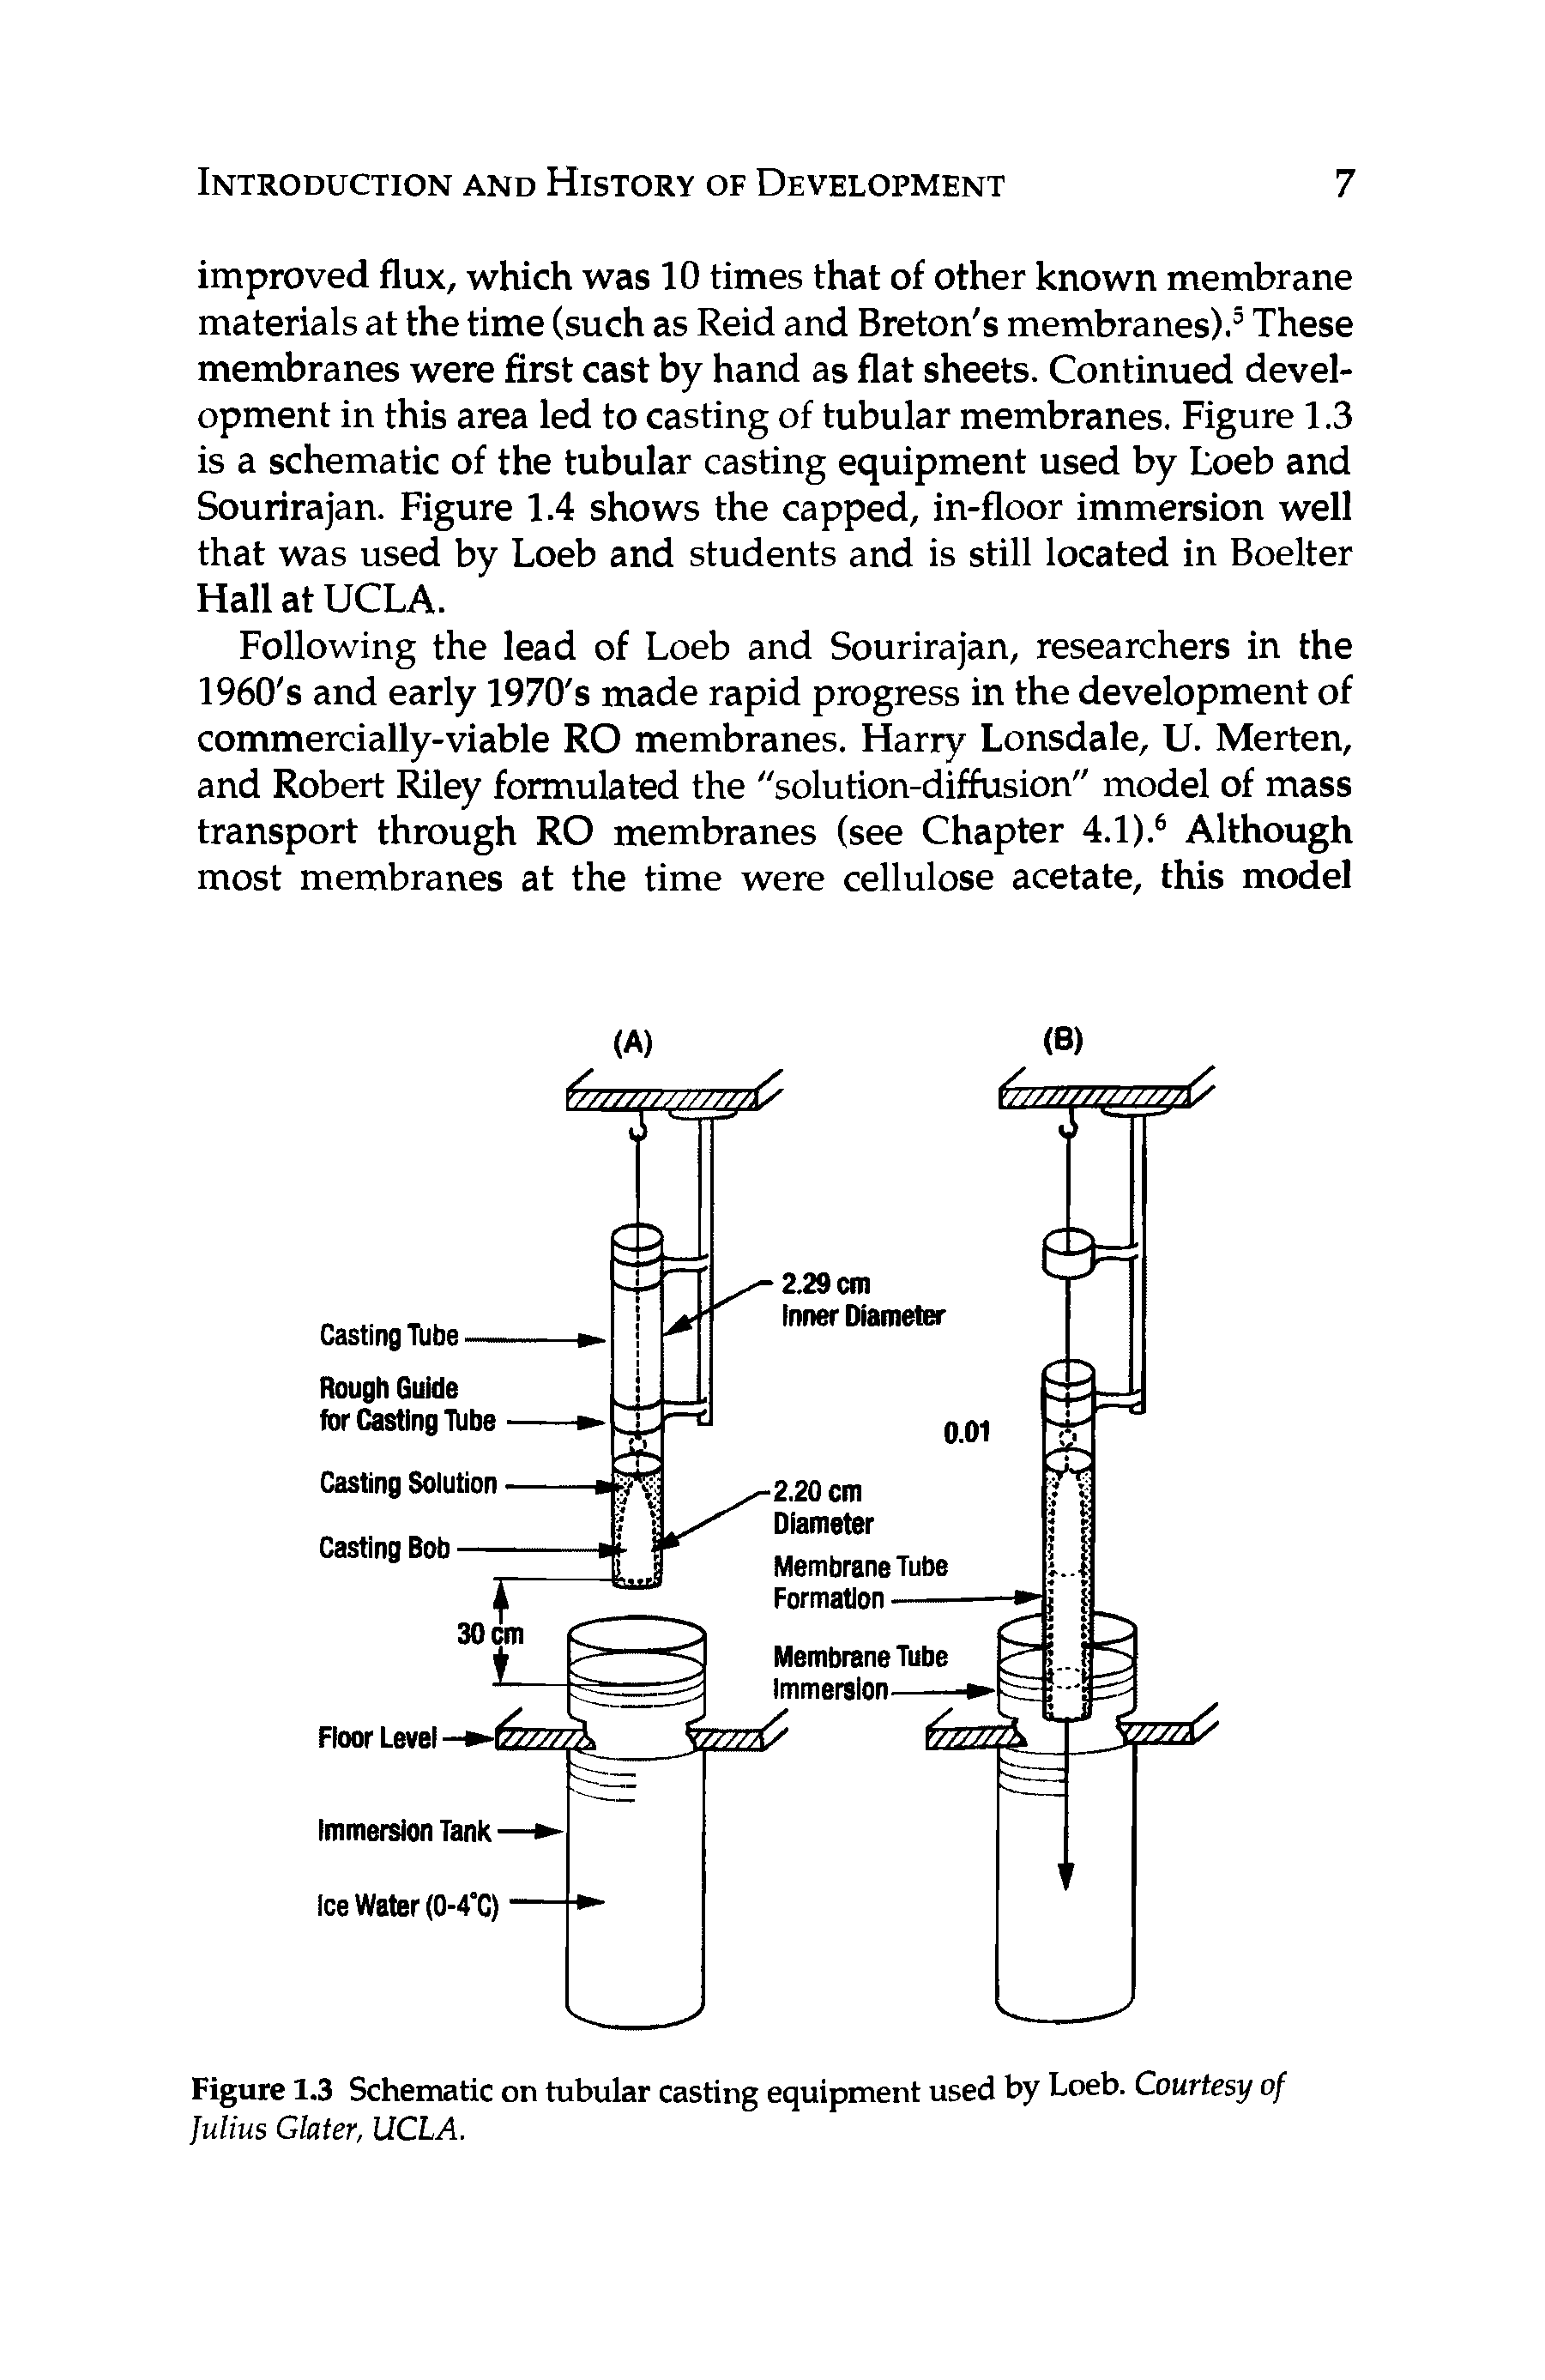 Figure 1.3 Schematic on tubular casting equipment used by Loeb. Courtesy of Julius Glater, UCLA.